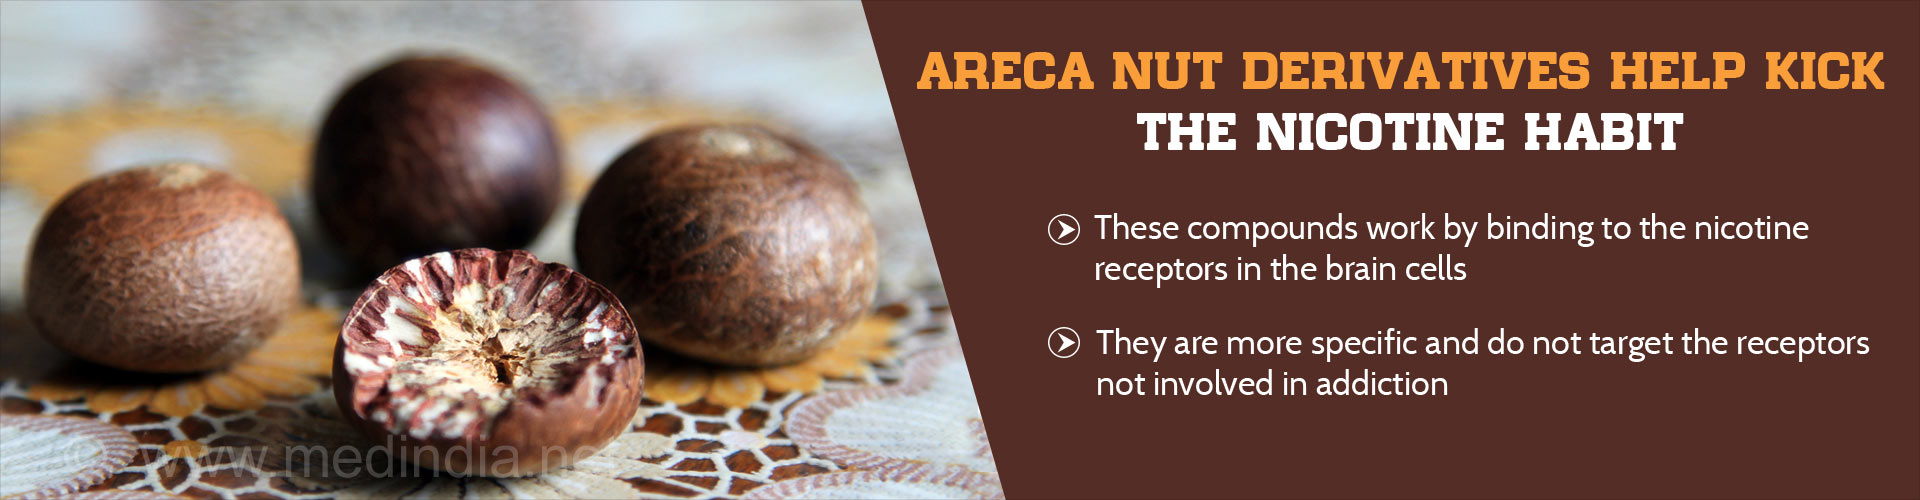 Areca Nut Derivatives Help Kick The Nicotine Habit
- These compounds work by binding to the nicotine receptors in the brain cells
- They are more specific and do not target the receptors not involved in addiction